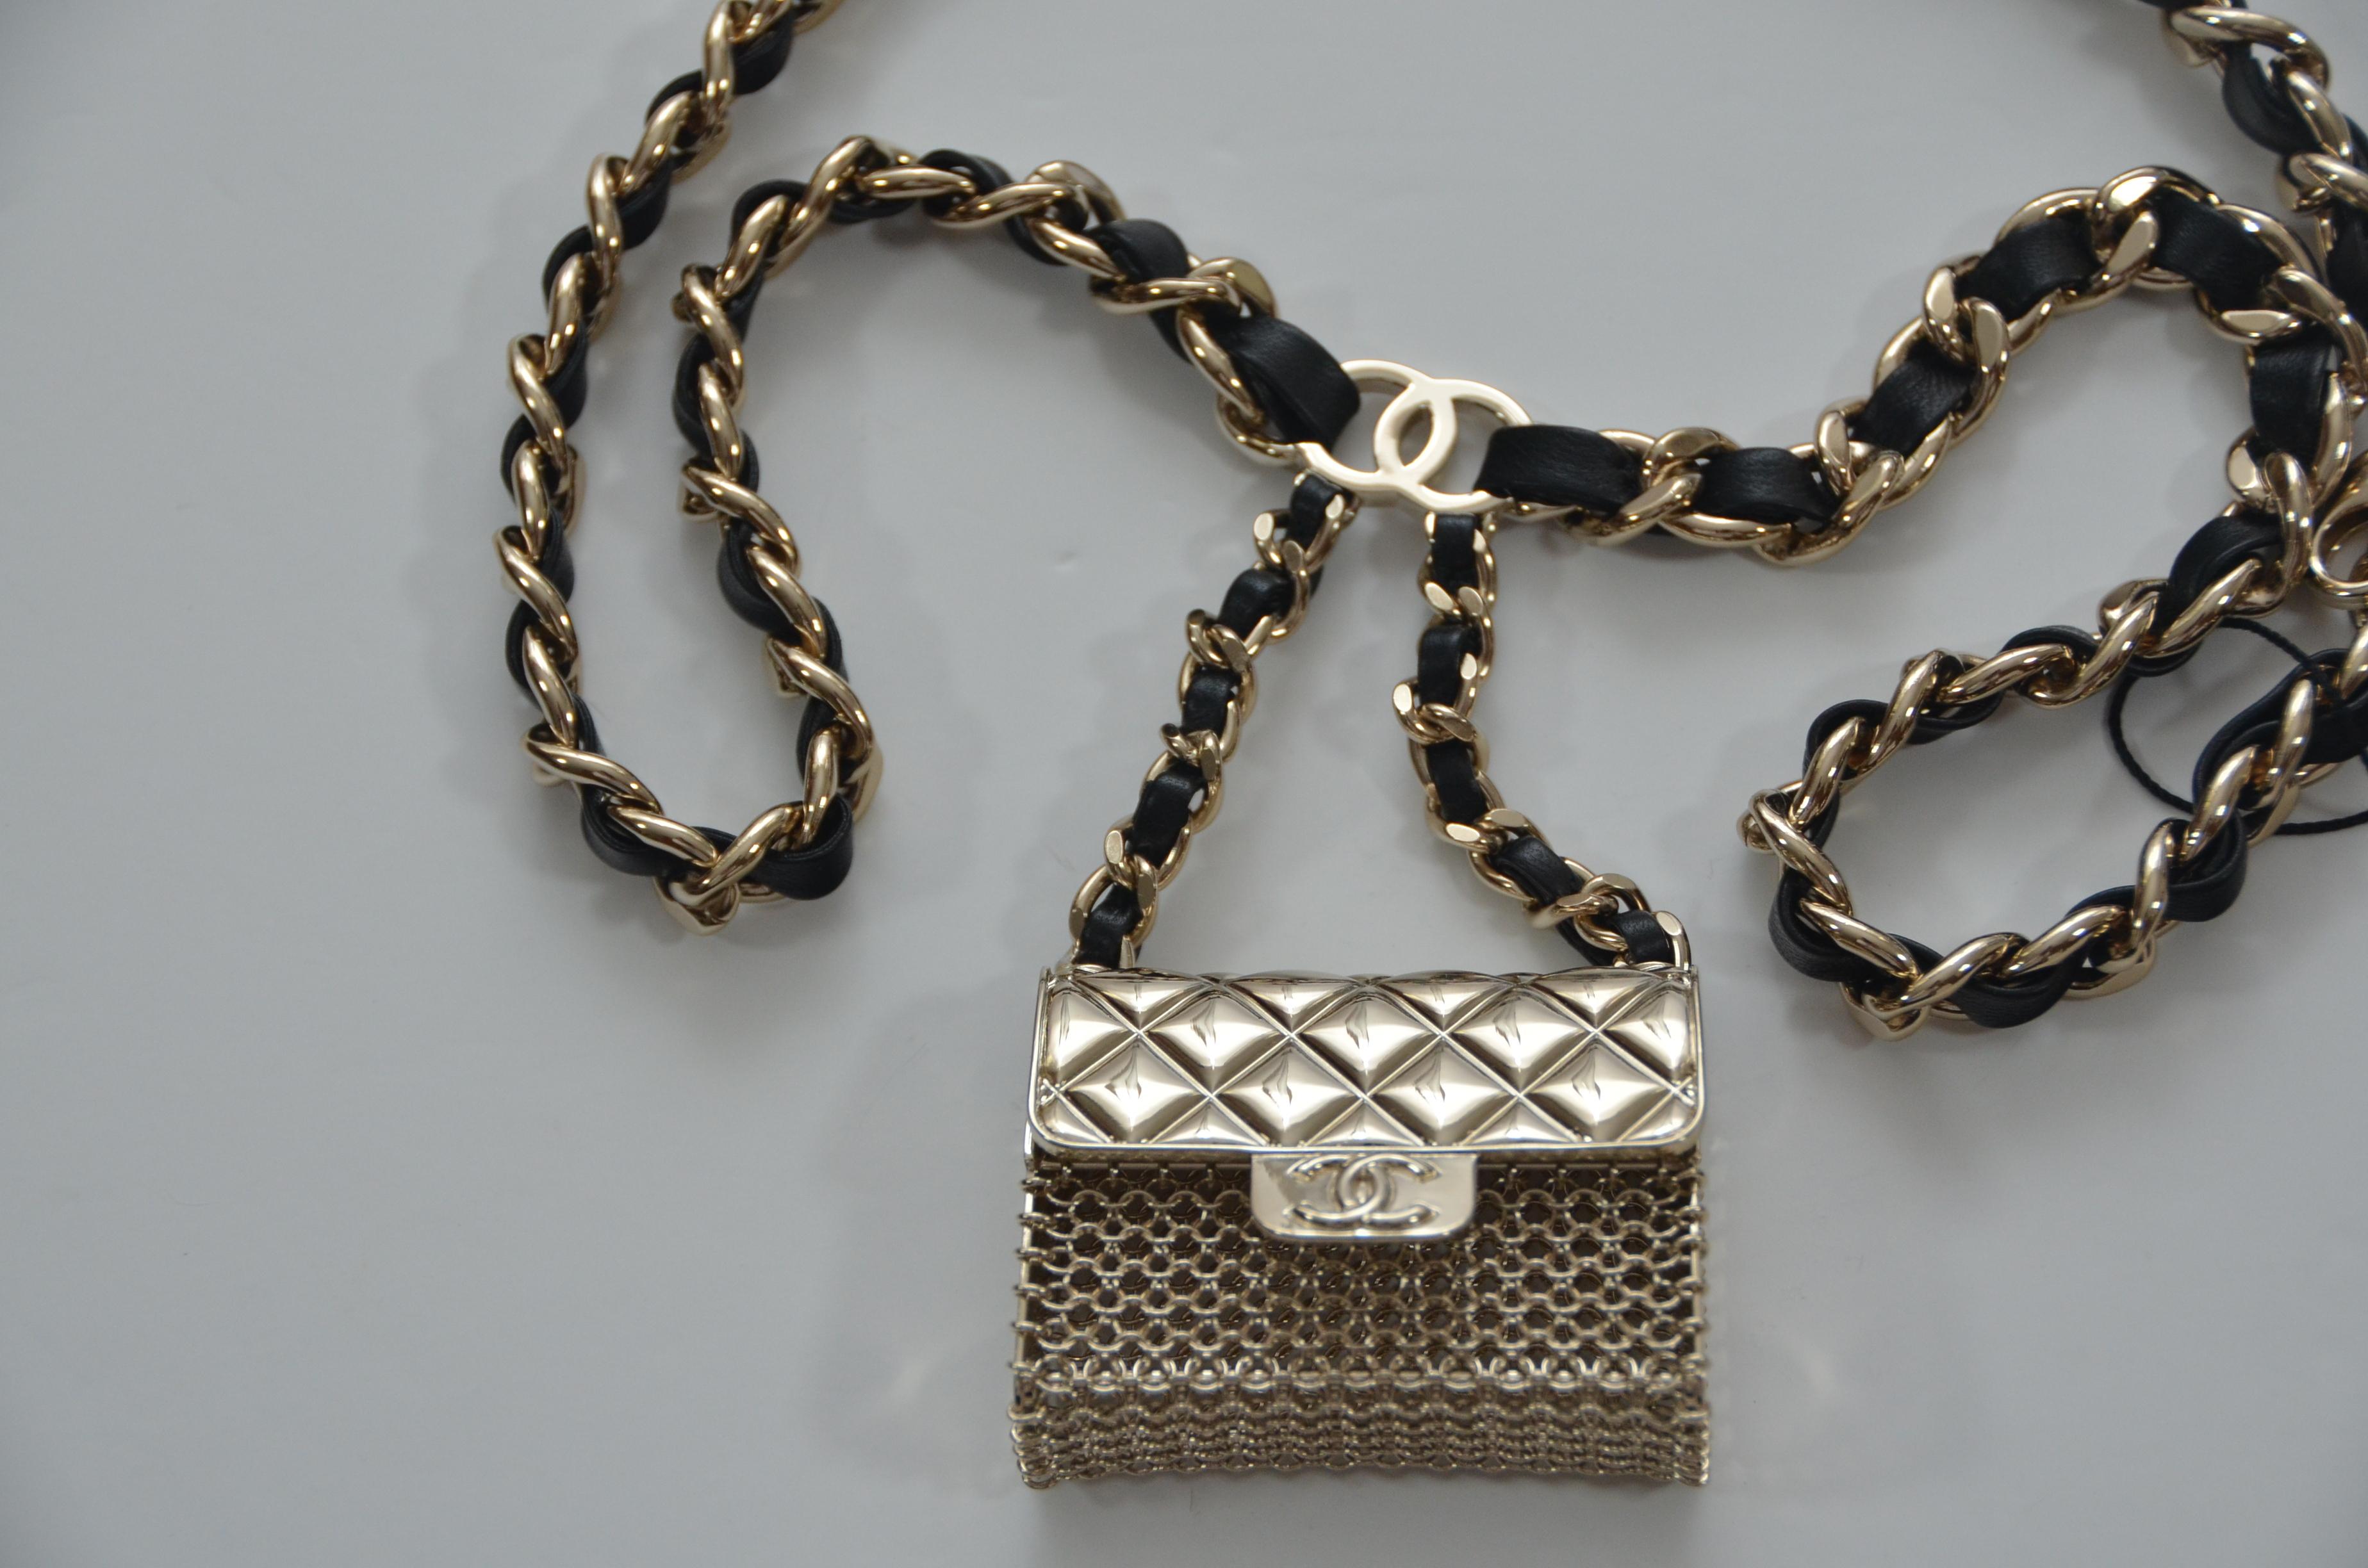 100% Chanel authentic guaranteed 
Chanel adjustable belt with mini classic Chanel purse attached
Mini purse can be opened.
Size 75
Sold out in stores and very collectible
New store fresh, only taken out for photography 
Chanel box, tags and mini